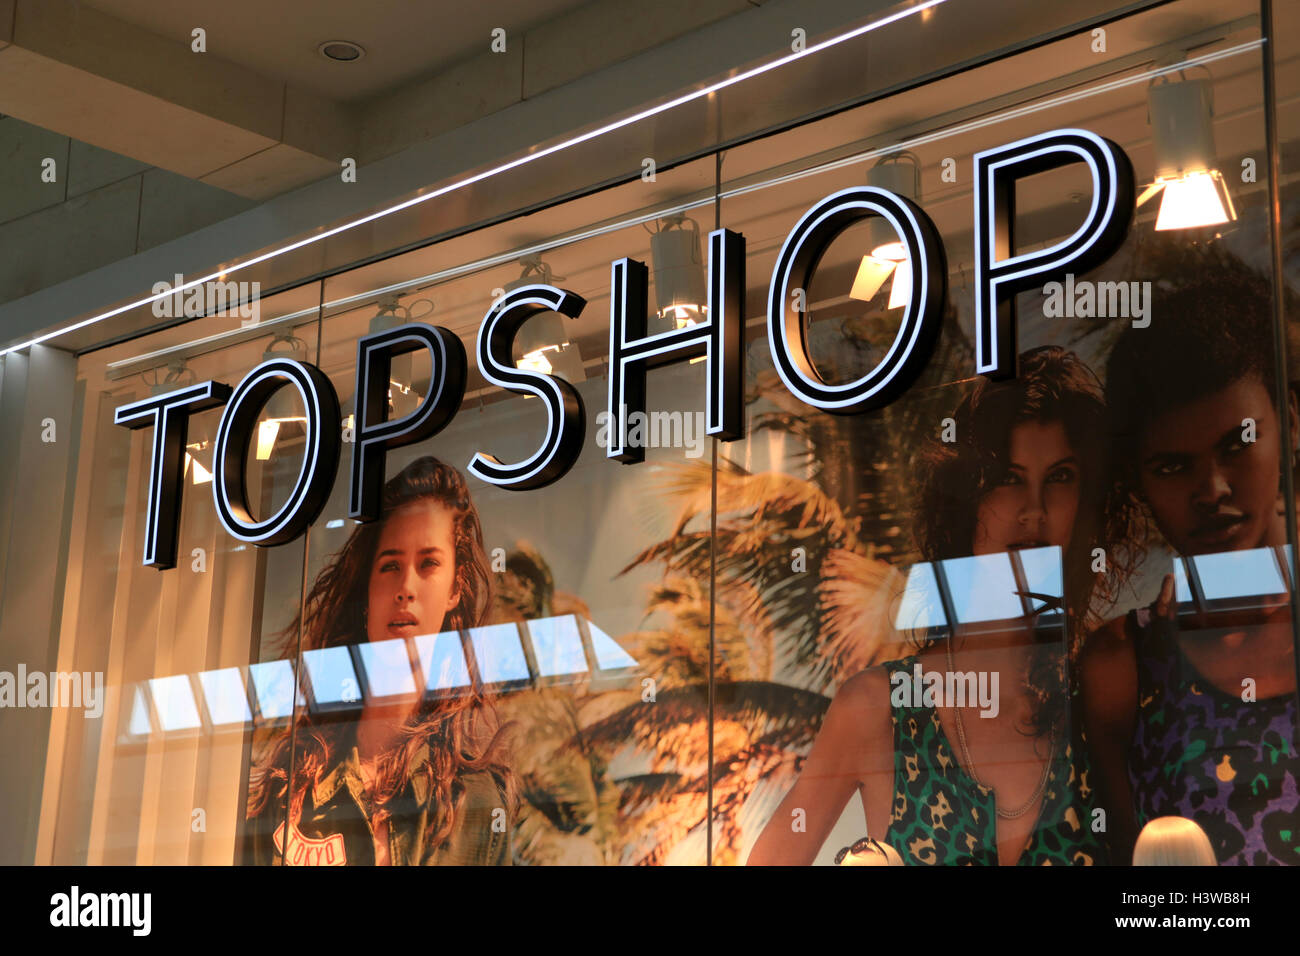 Topshop store sign, Bluewater Shopping Centre, Stone, Greenhithe, Kent, England Stock Photo